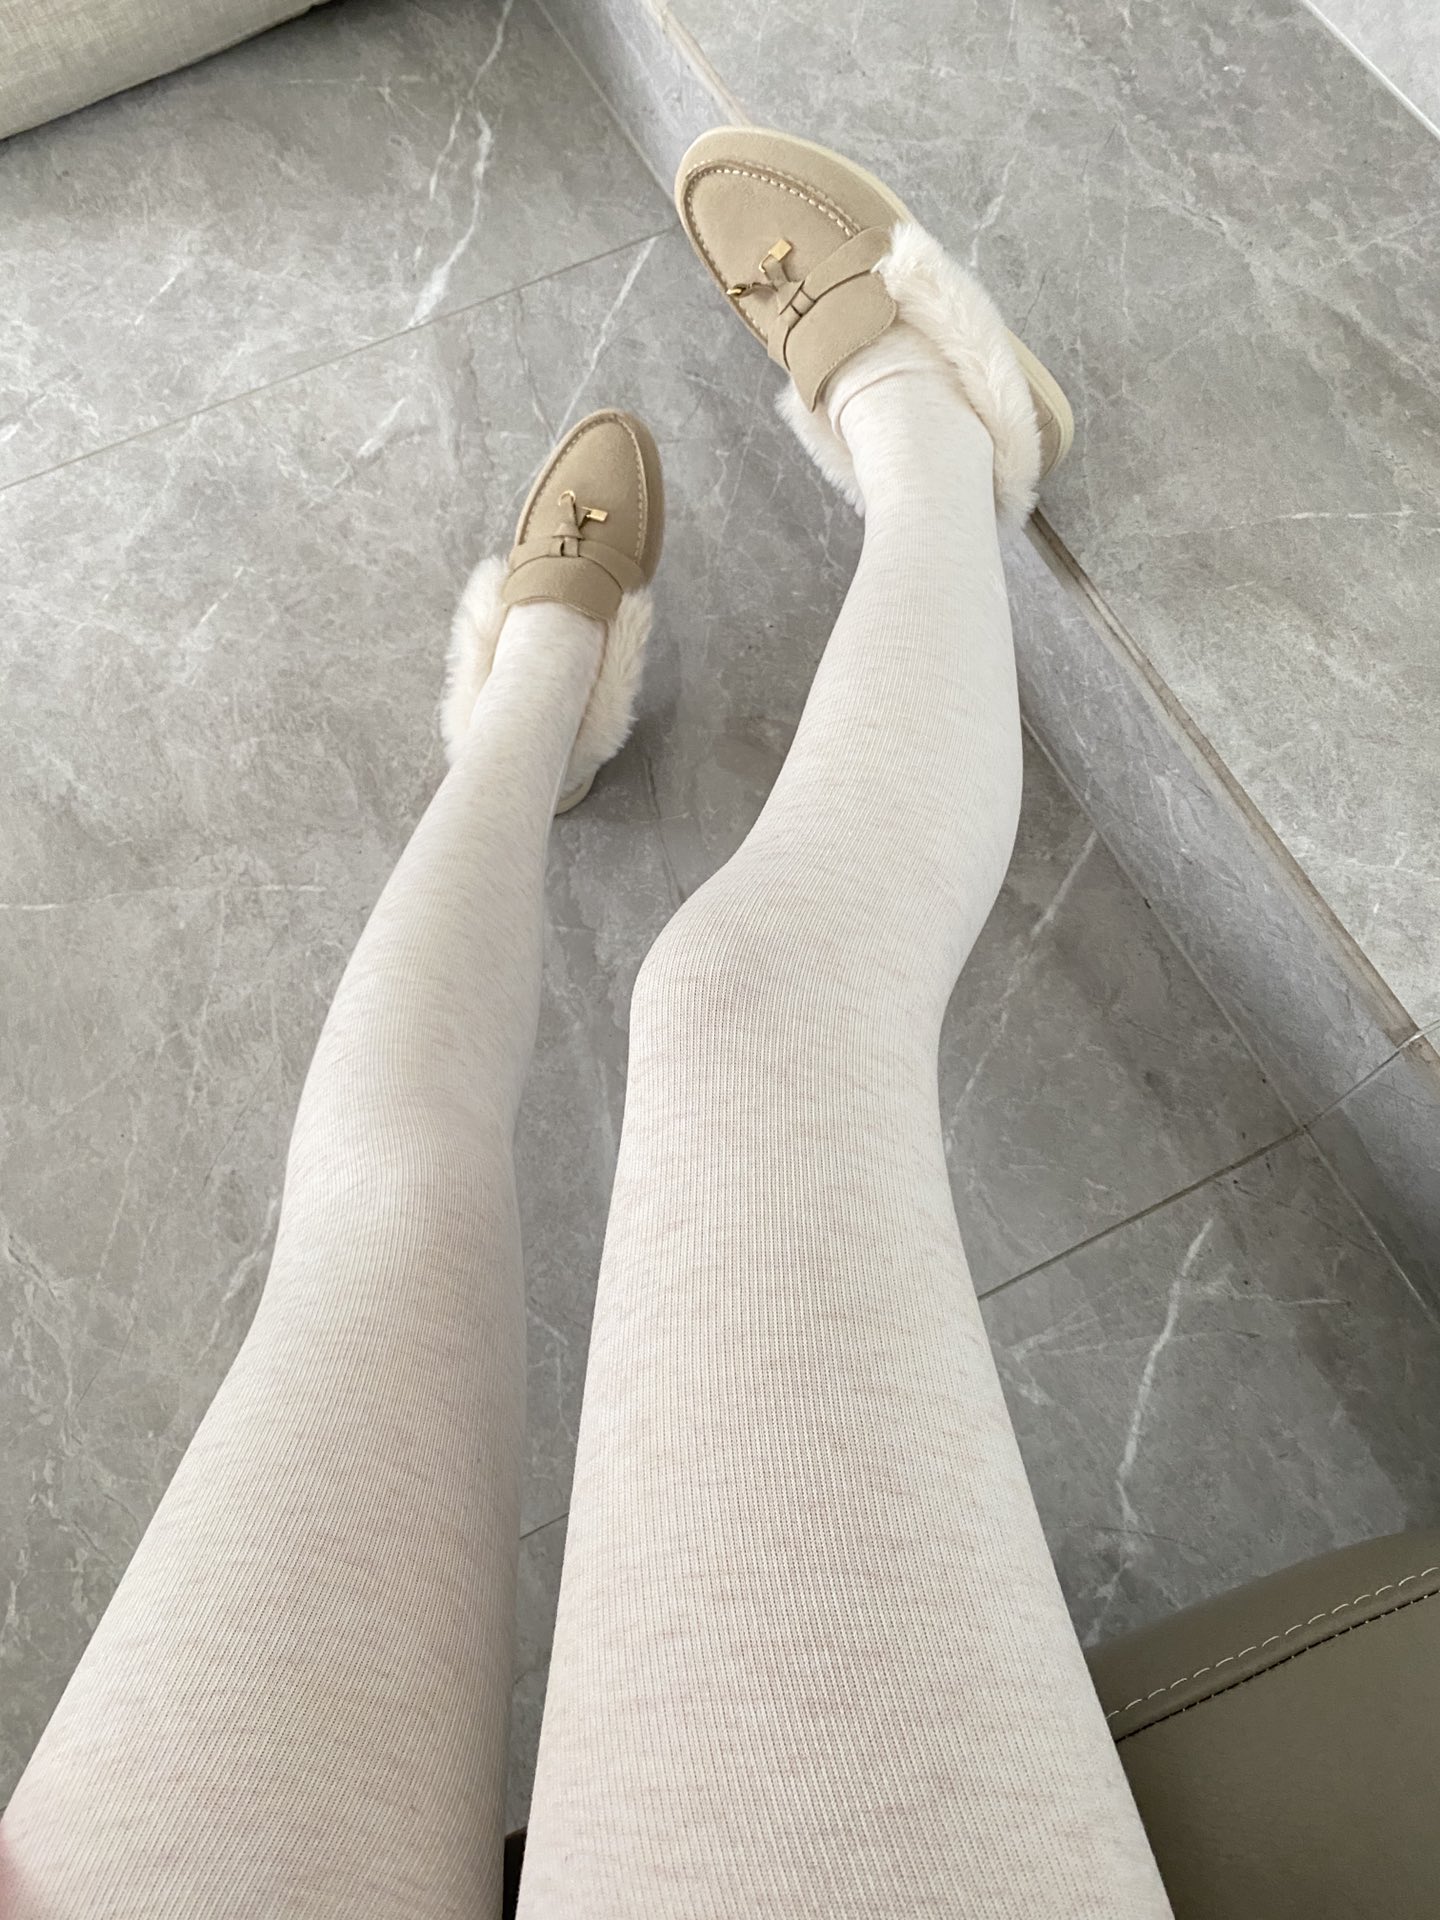 Chanel Sock- Pantyhose Unsurpassed Quality
 White